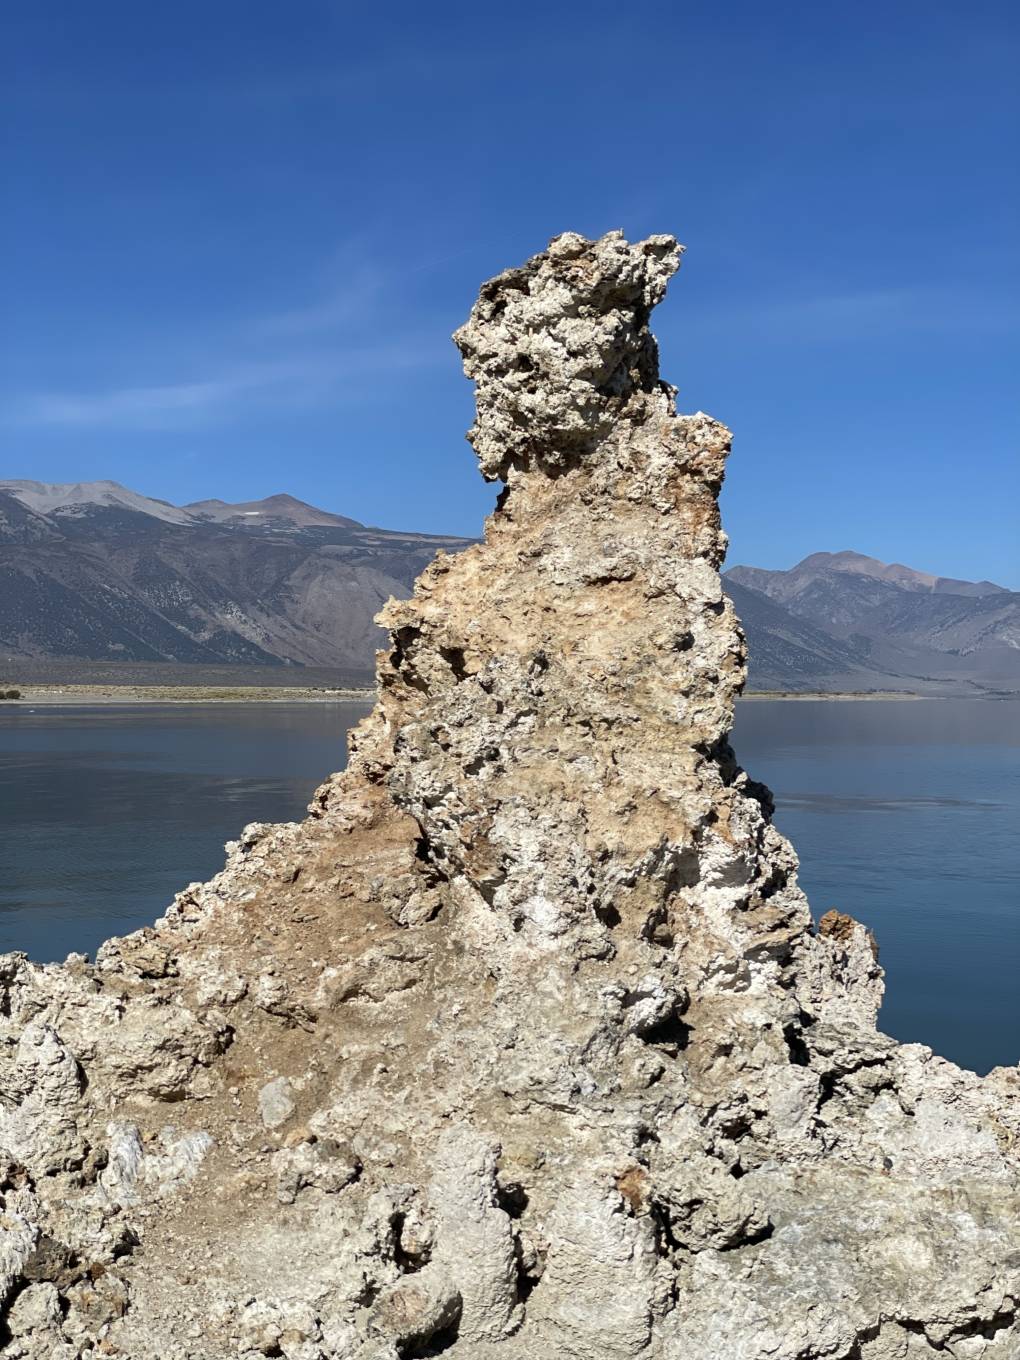 A piece of tufa that looks like the side profile of a warrior.